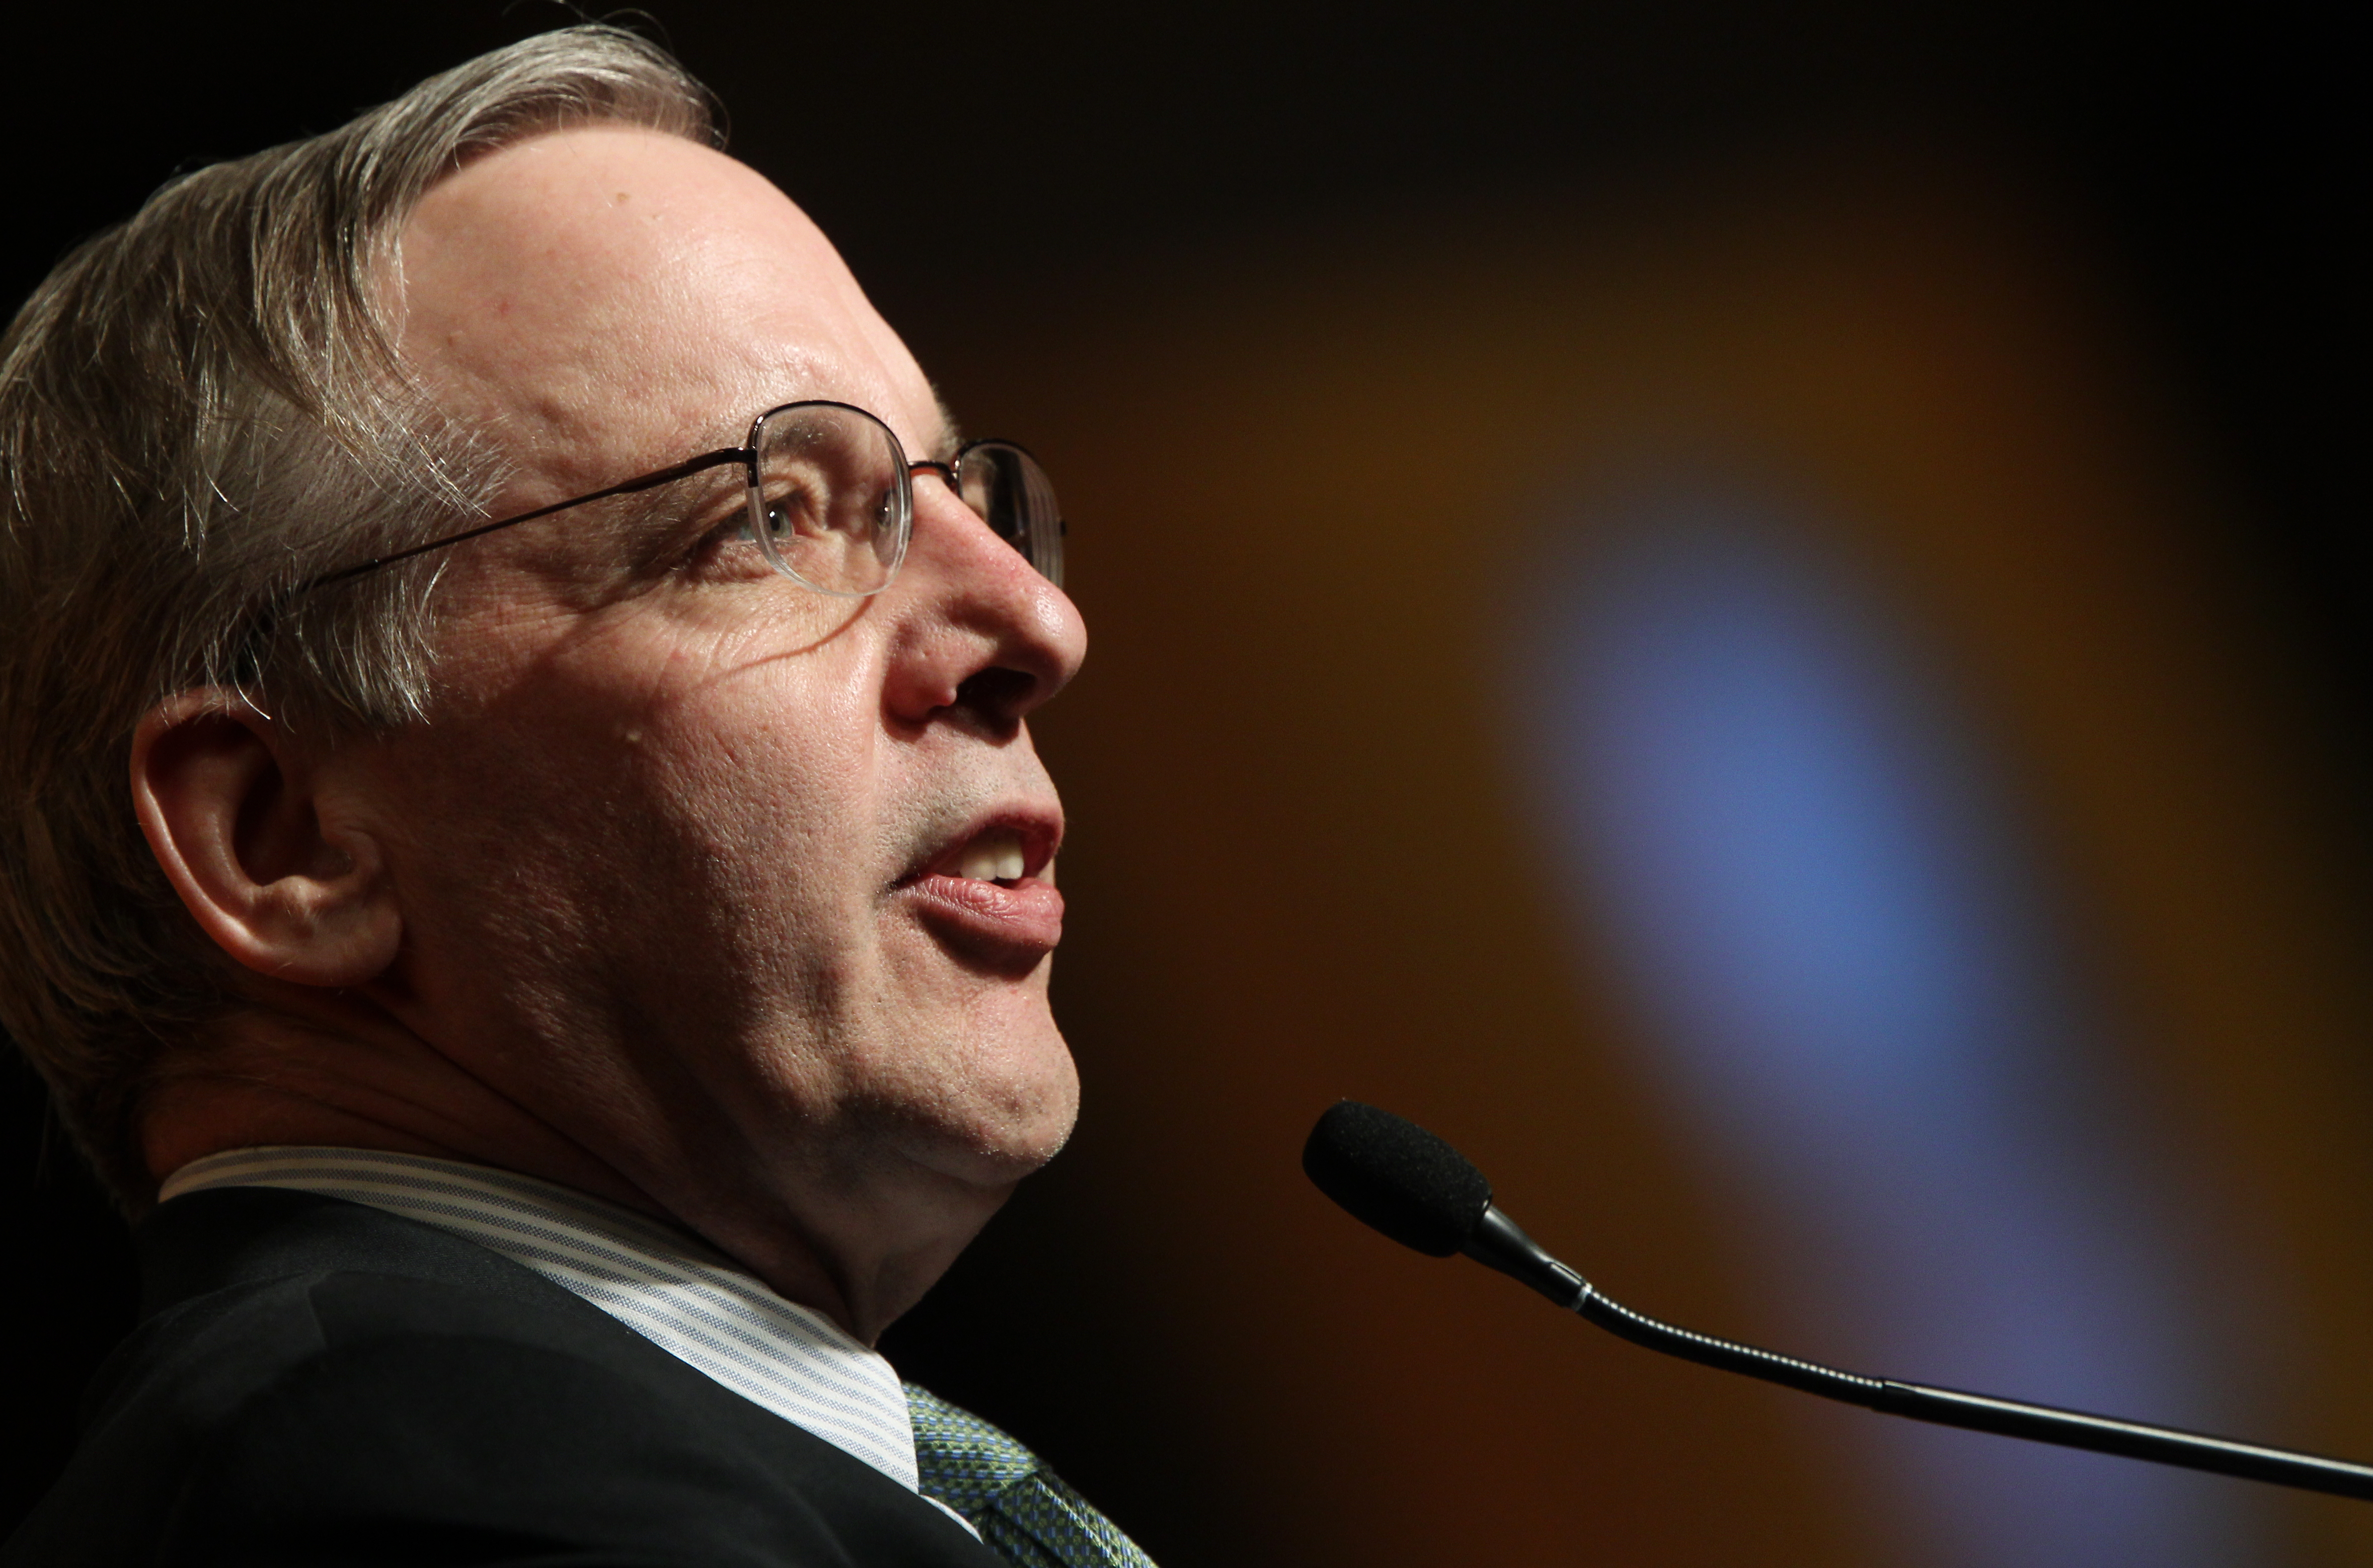 William C. Dudley, President & Chief Executive Officer of Federal Reserve Bank of New York, delivers the speech during an evening dialogue at Conrad Hotel, Admiralty. 12APR11